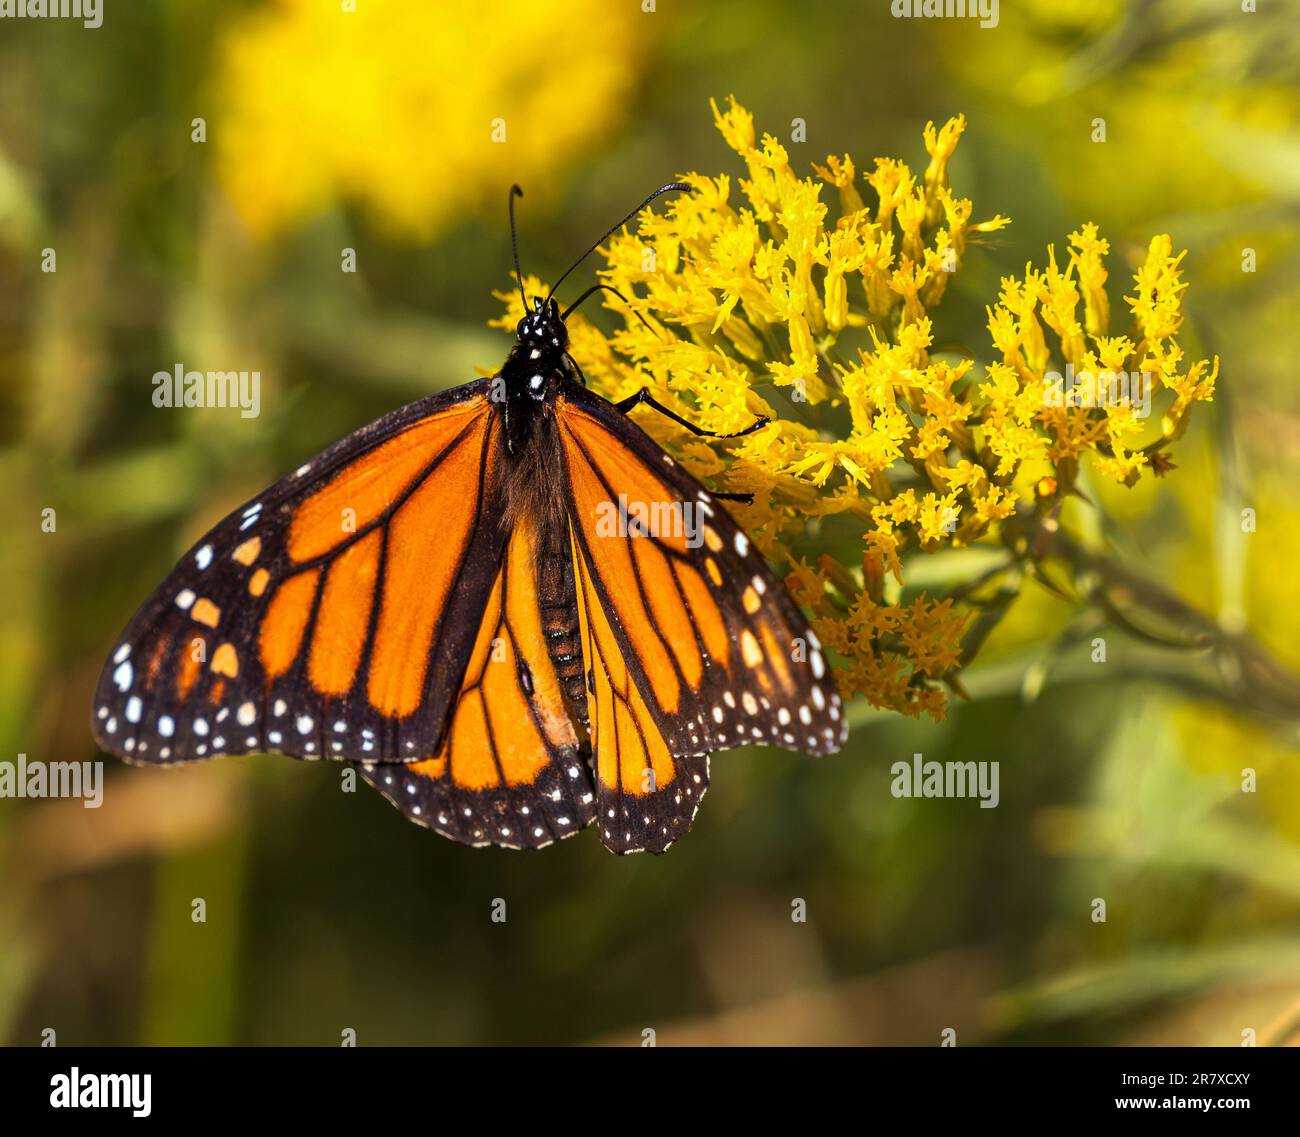 Closeup of a Monarch butterfly pollinating the yellow flowers on a Goldenrod plant. Stock Photo